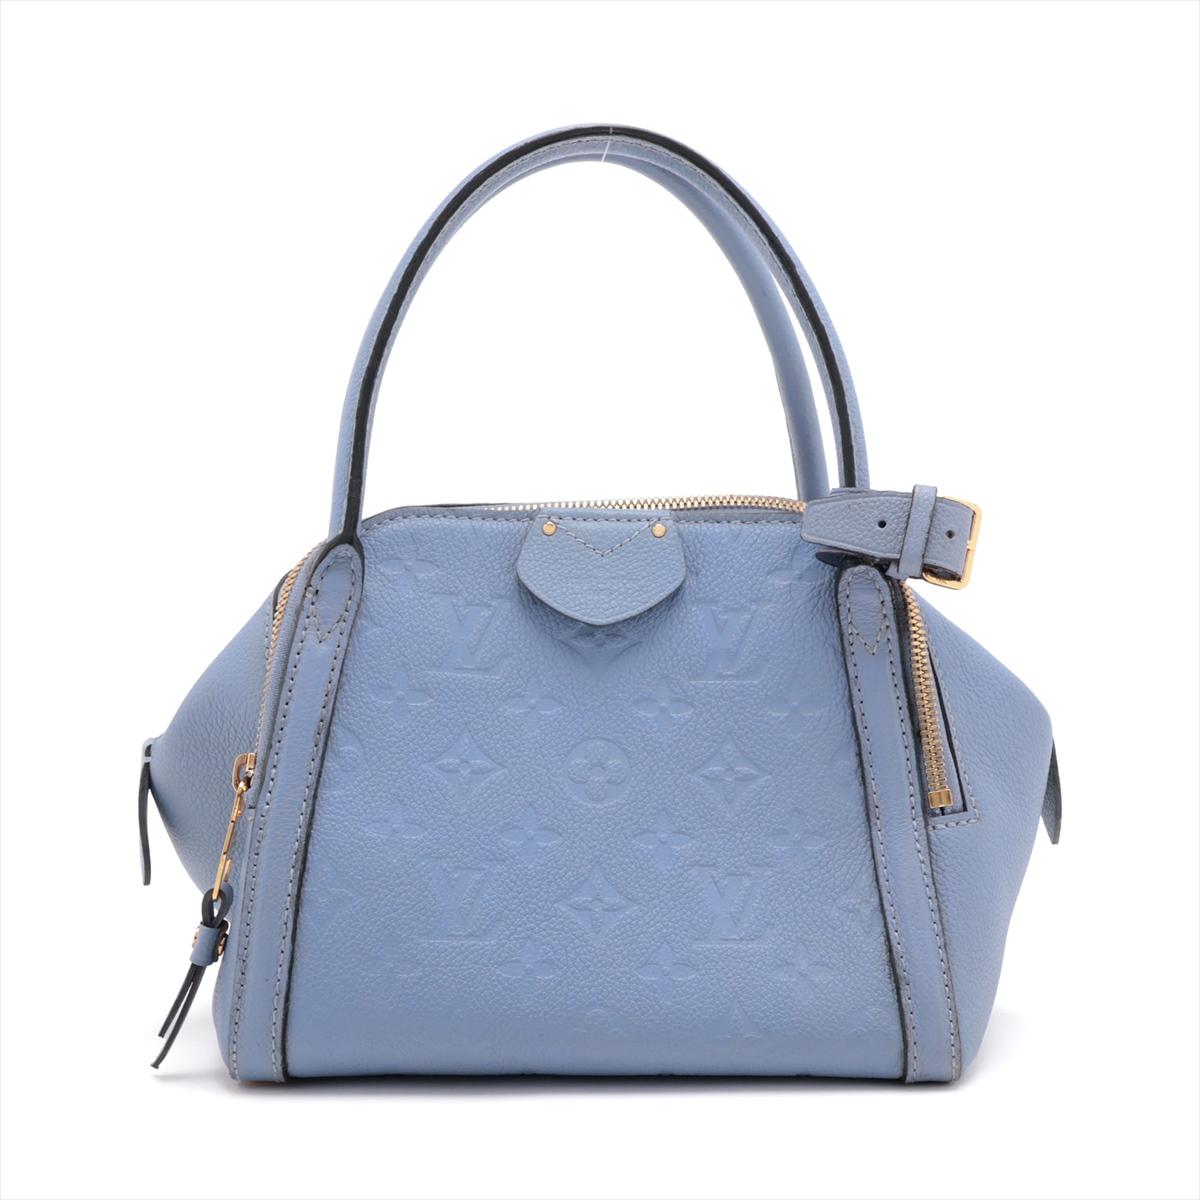 The Louis Vuitton Monogram Empreinte Marais BB in Lilac is a stunning and sophisticated handbag that effortlessly combines timeless elegance with modern style. Crafted from luxurious Monogram Empreinte leather, the bag showcases the iconic LV